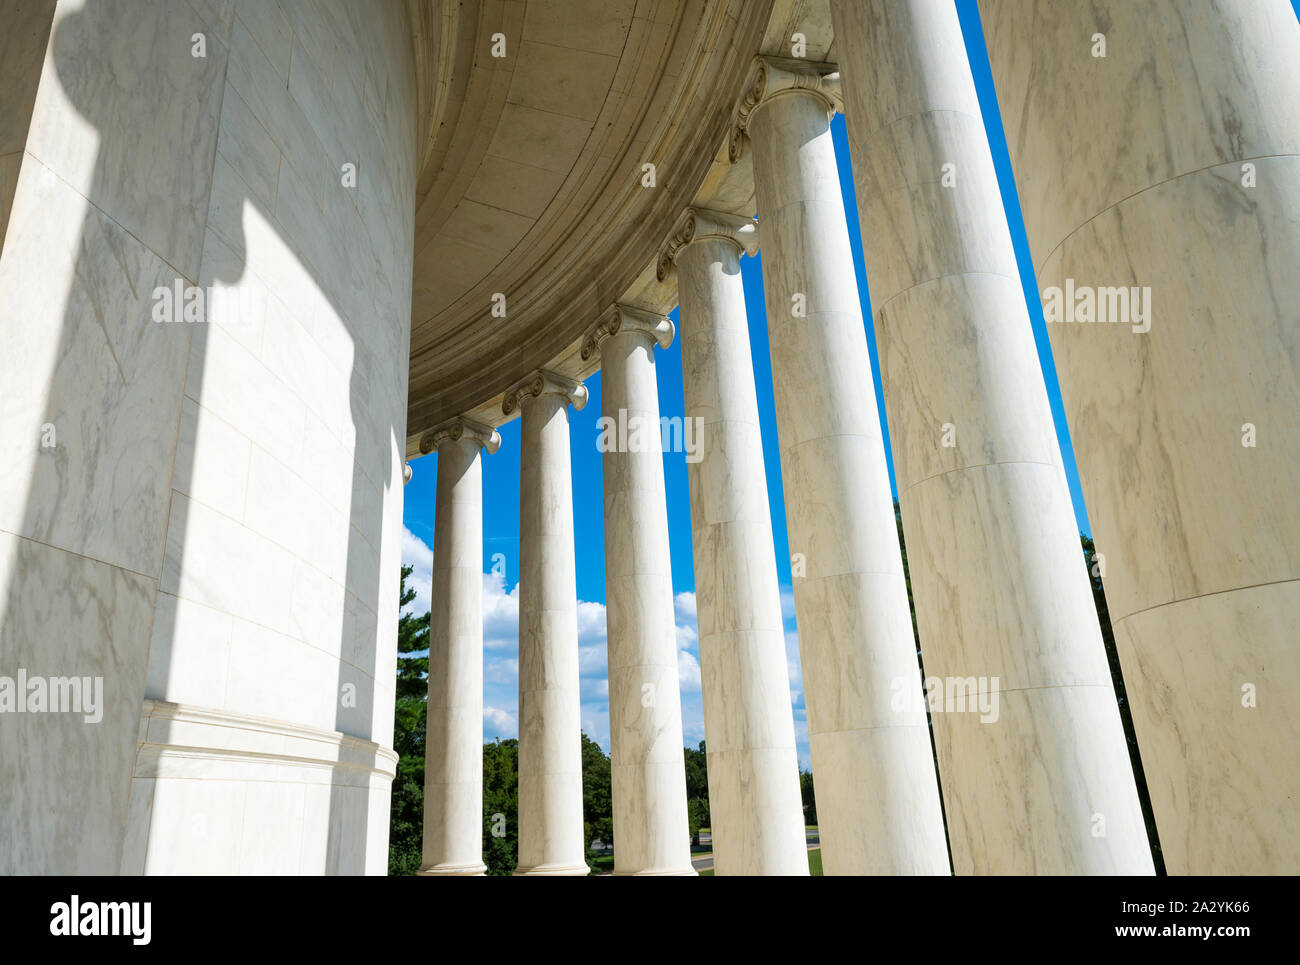 Scenic view of white marble neoclassical columns from the interior of the rotunda at the Jefferson Memorial in Washington DC, USA Stock Photo